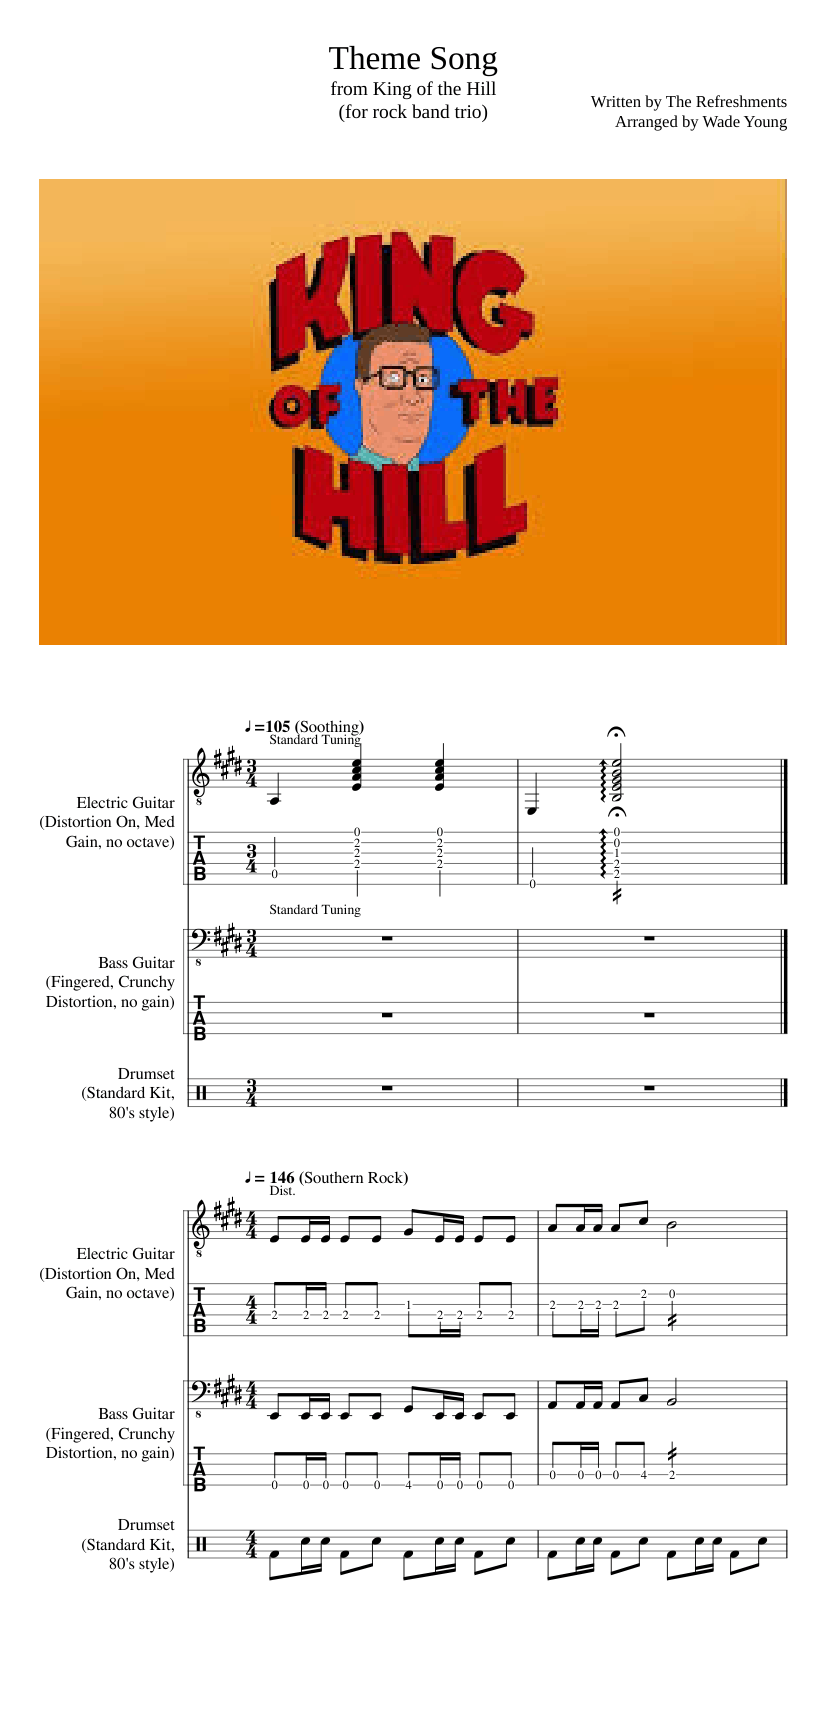 King of the Hill theme song (cover)